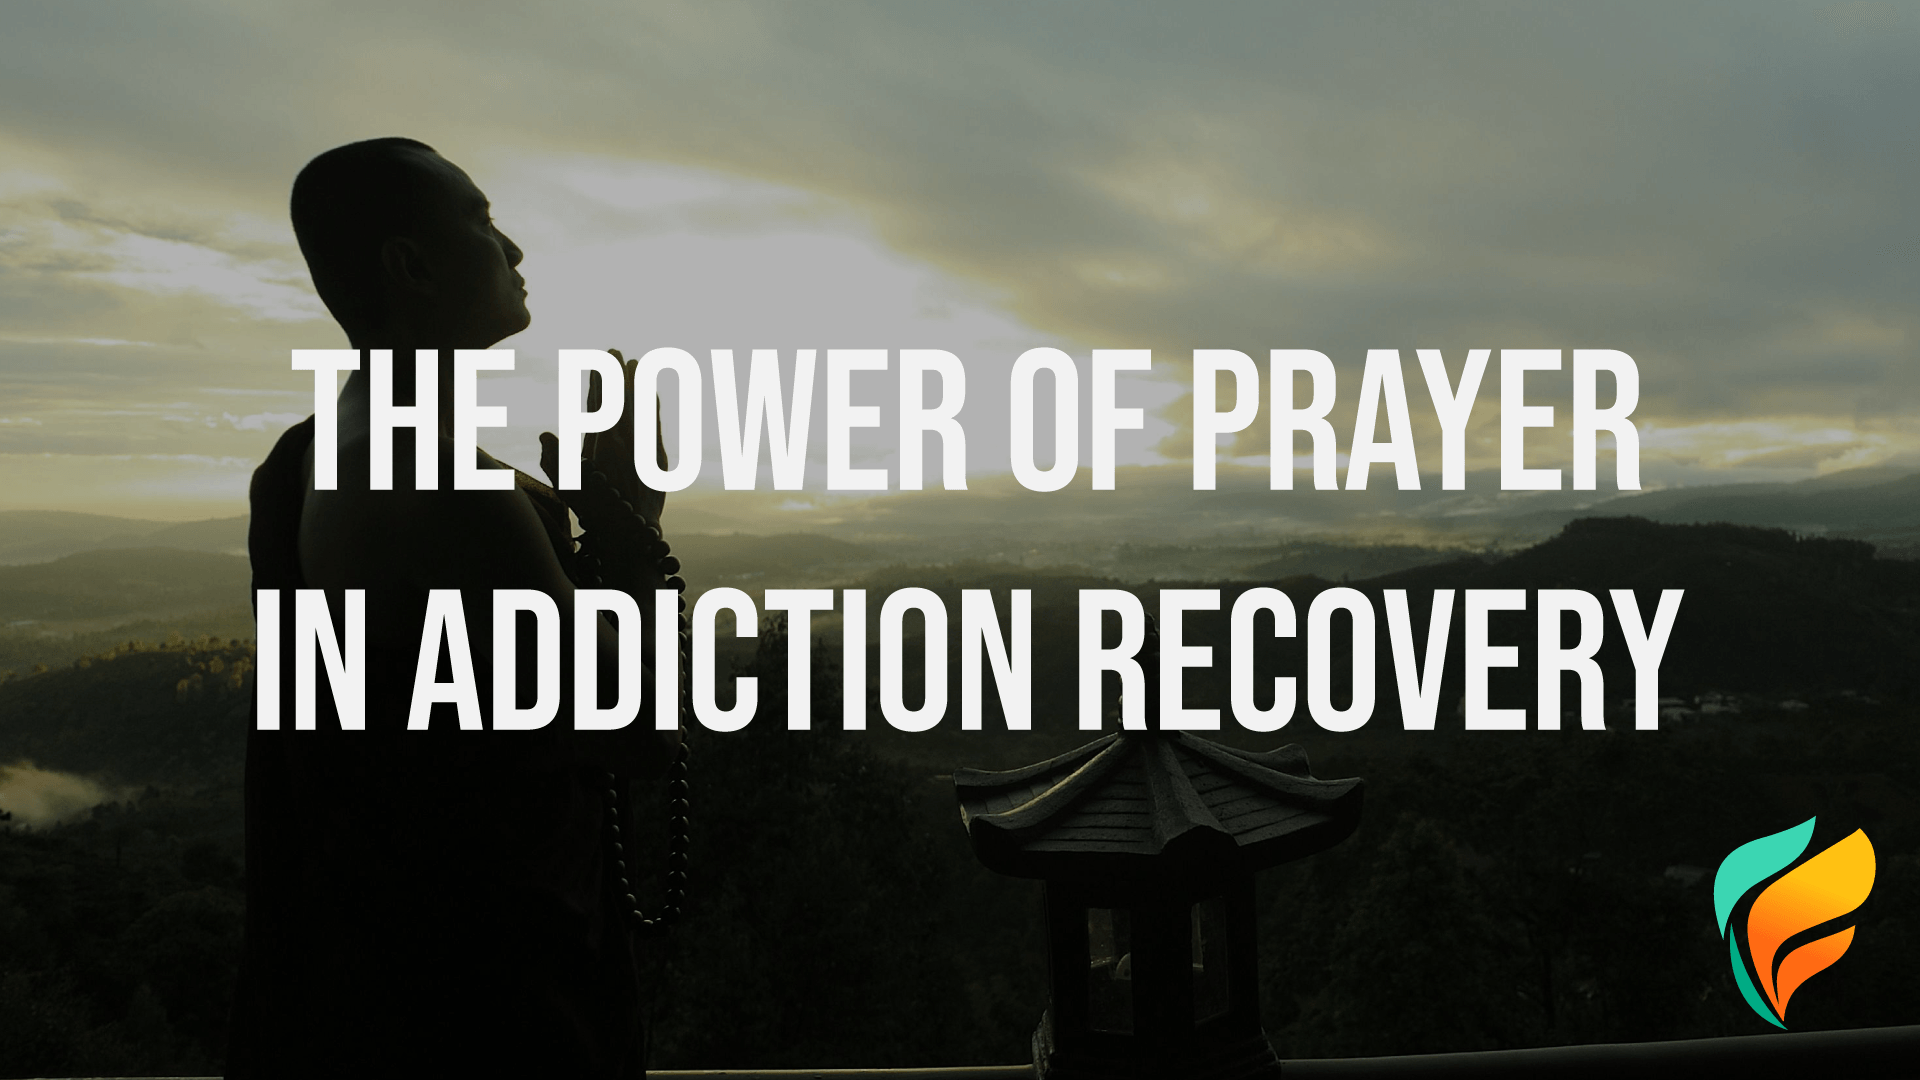 The Power of Prayer in Addiction Recovery